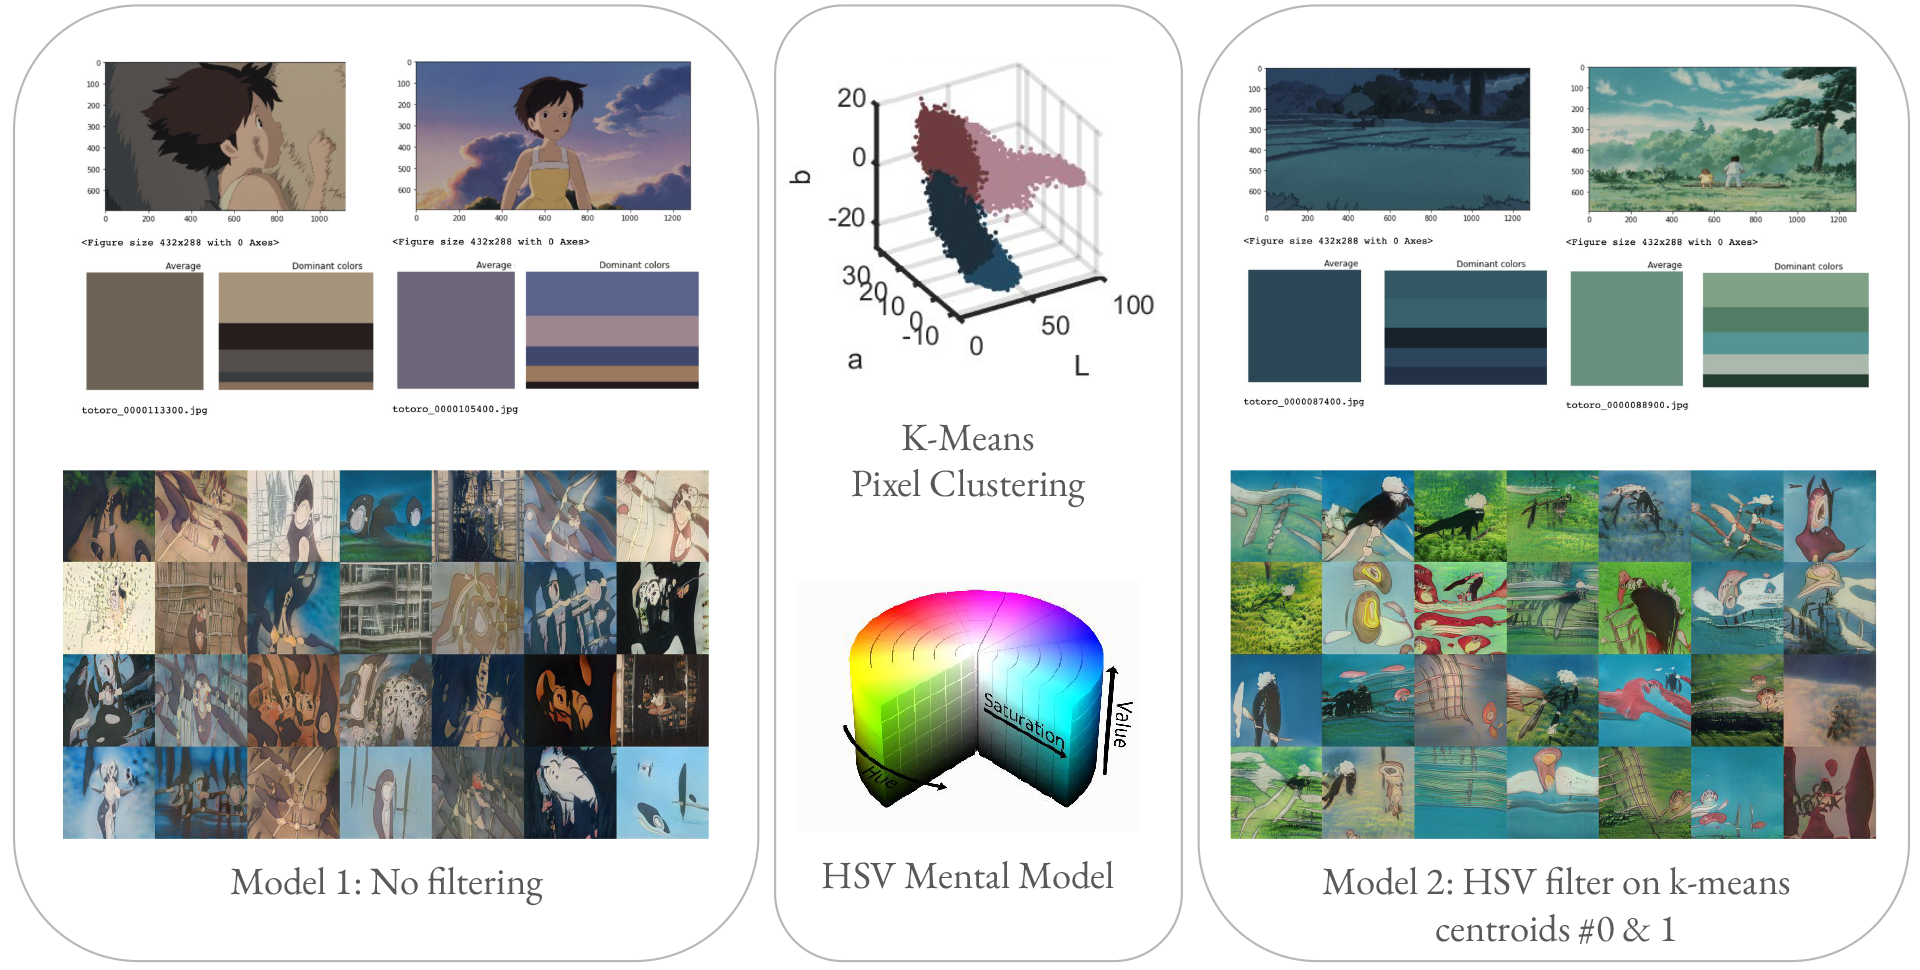 A model output on the left contains outputs in the full color range, while the model on the right contains only blue-green hued images, due to the filtering step shown in the middle which uses k-means pixel clustering and HSV filtration to subset training data.